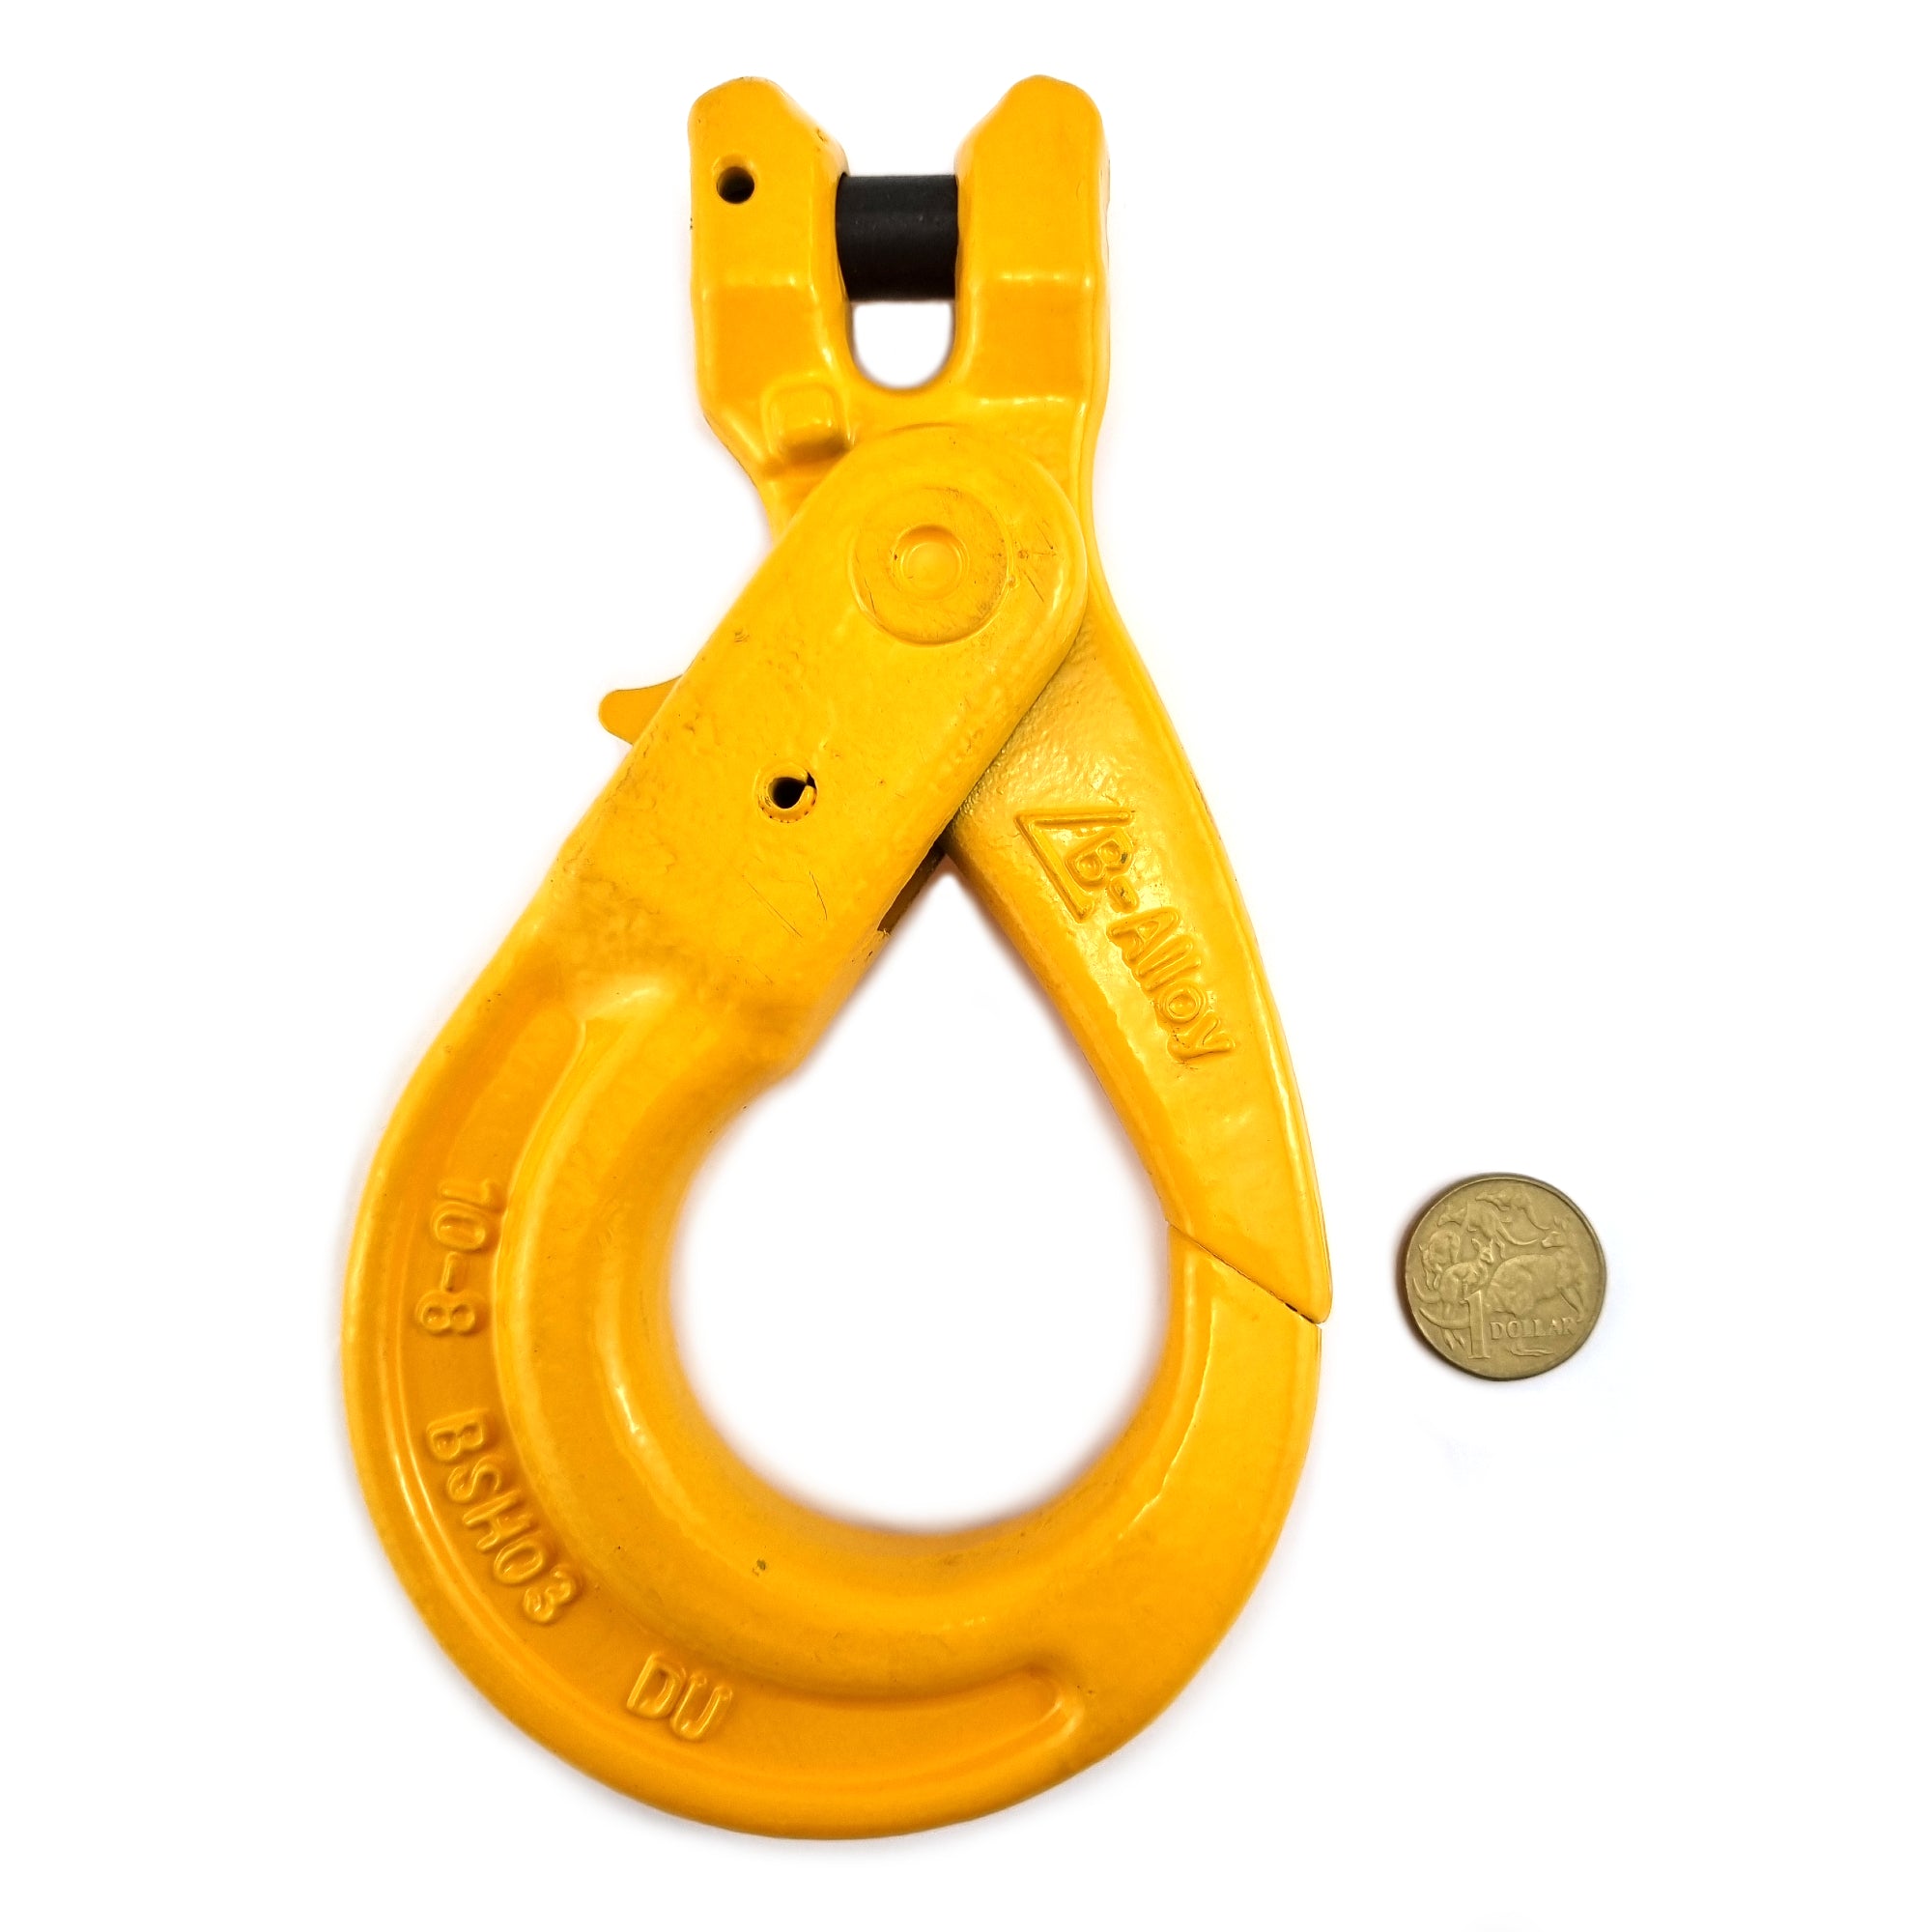 10mm Clevis self locking hook, grade T(80) with 3.2 tonne rating. Shop hooks and hardware chain.com.au